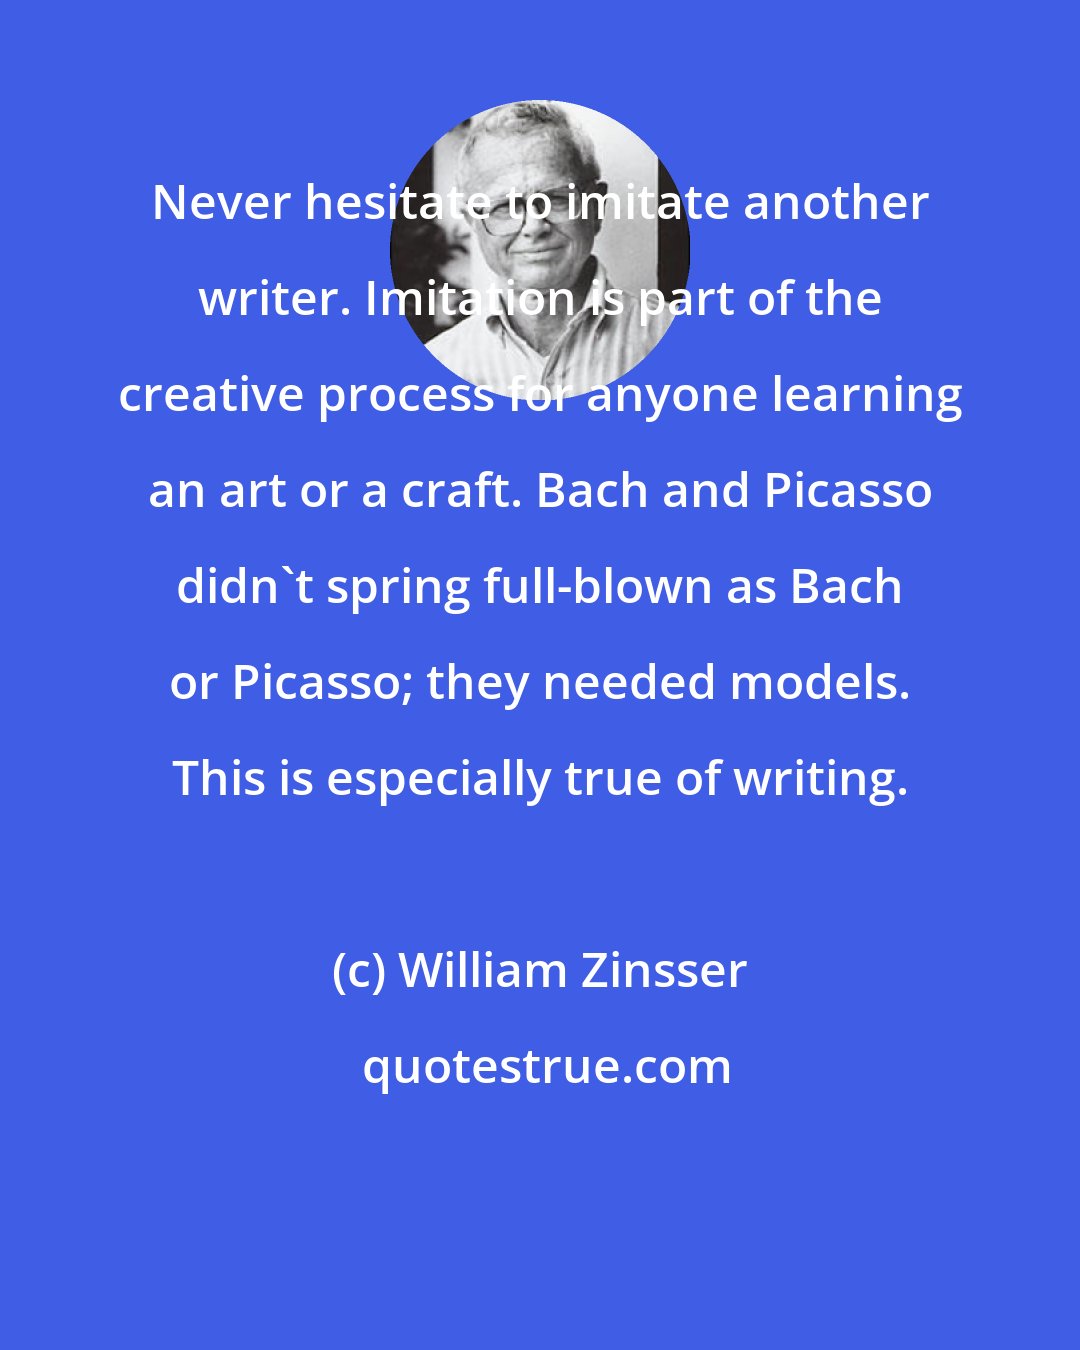 William Zinsser: Never hesitate to imitate another writer. Imitation is part of the creative process for anyone learning an art or a craft. Bach and Picasso didn't spring full-blown as Bach or Picasso; they needed models. This is especially true of writing.